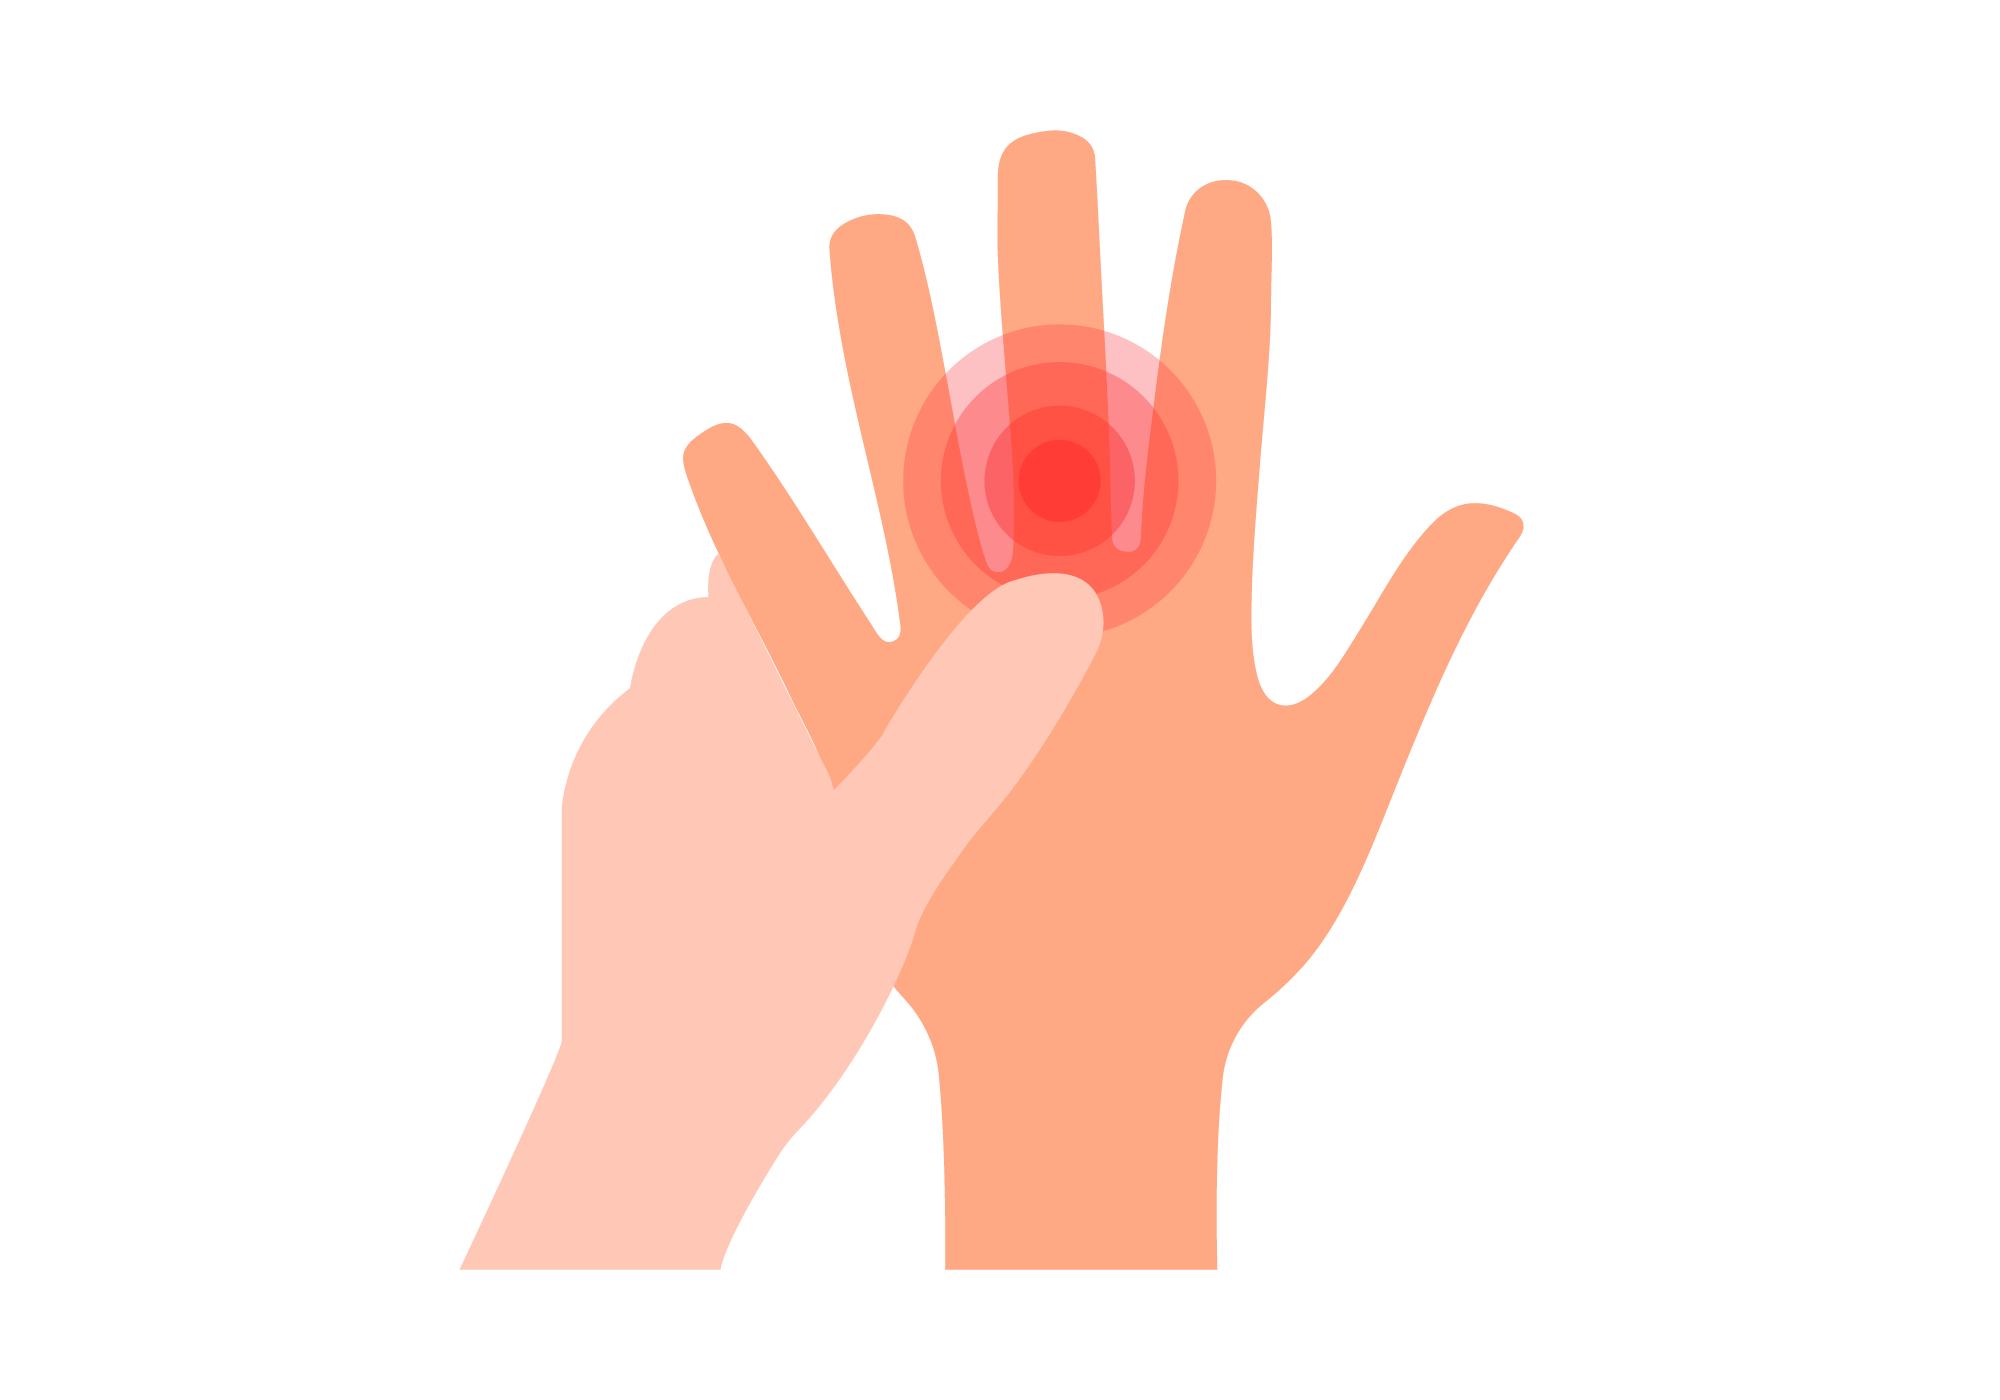 The Most Common Forms of Hand Pain - AOA Orthopedic Specialists